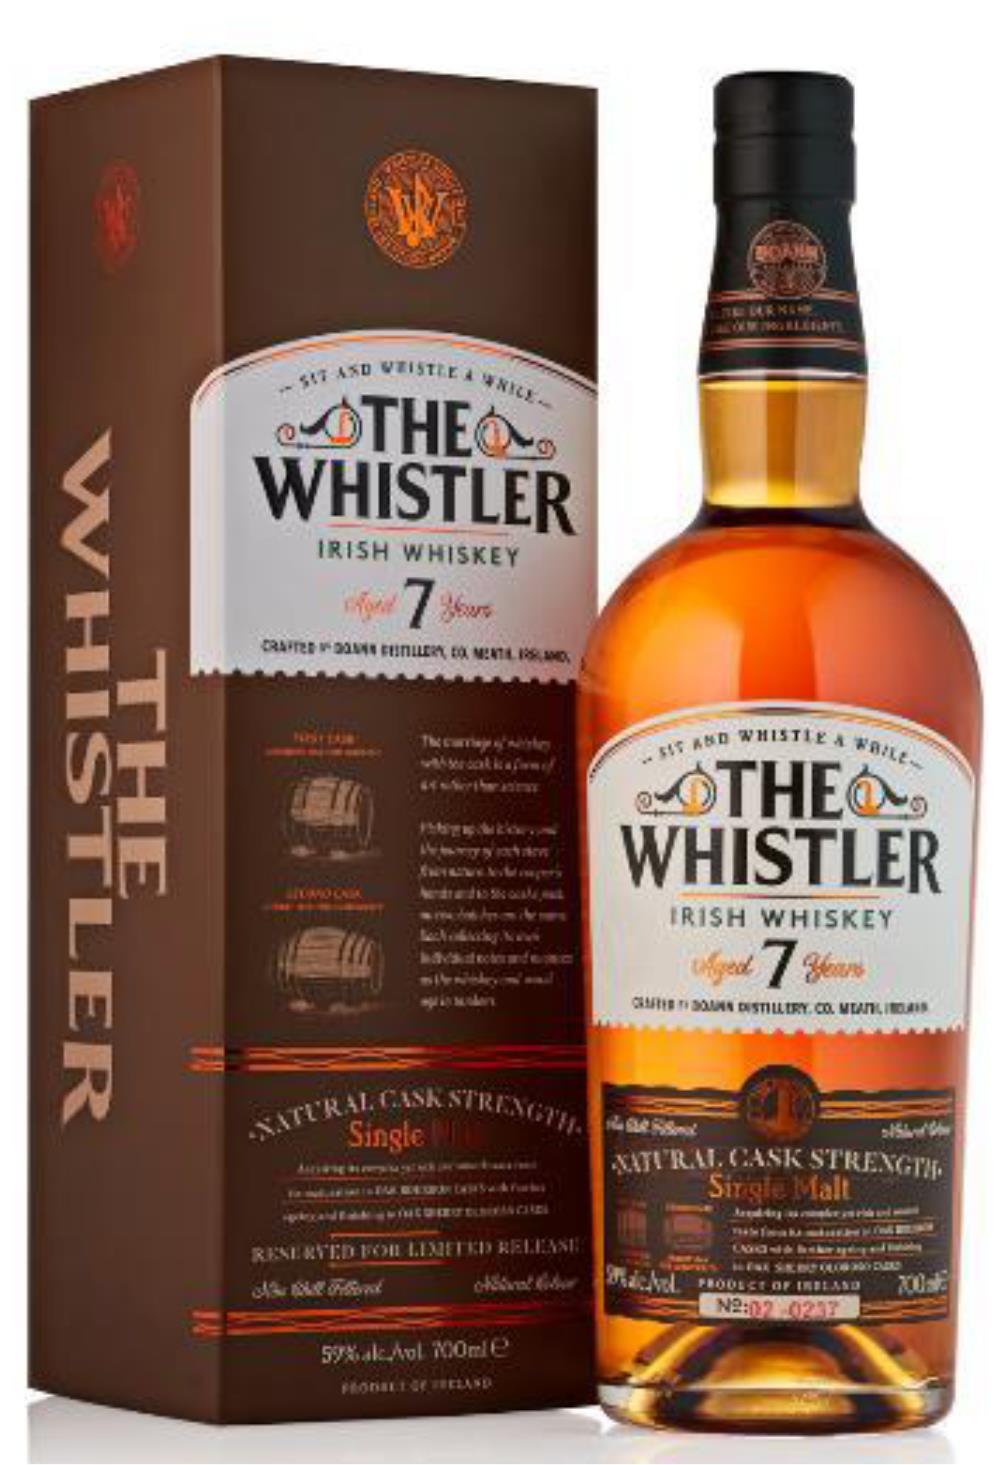 The Whistler - 7 Years Old - Cask Strength (Sherry Cask Finish)